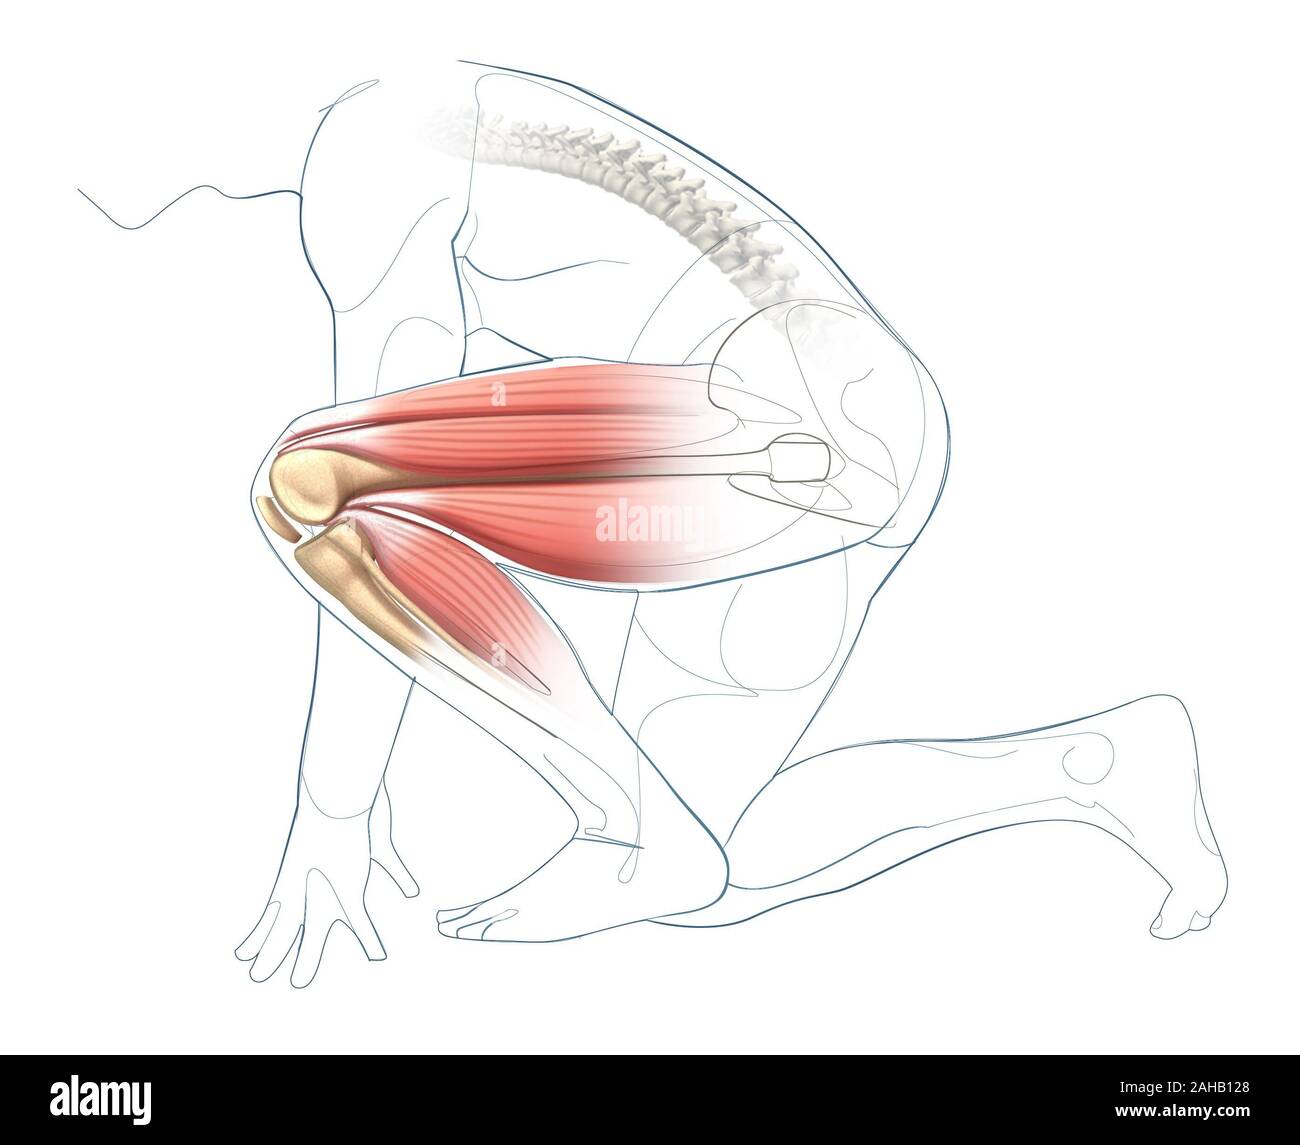 Bursitis of the hip joint - Stock Image - C011/0413 - Science Photo Library